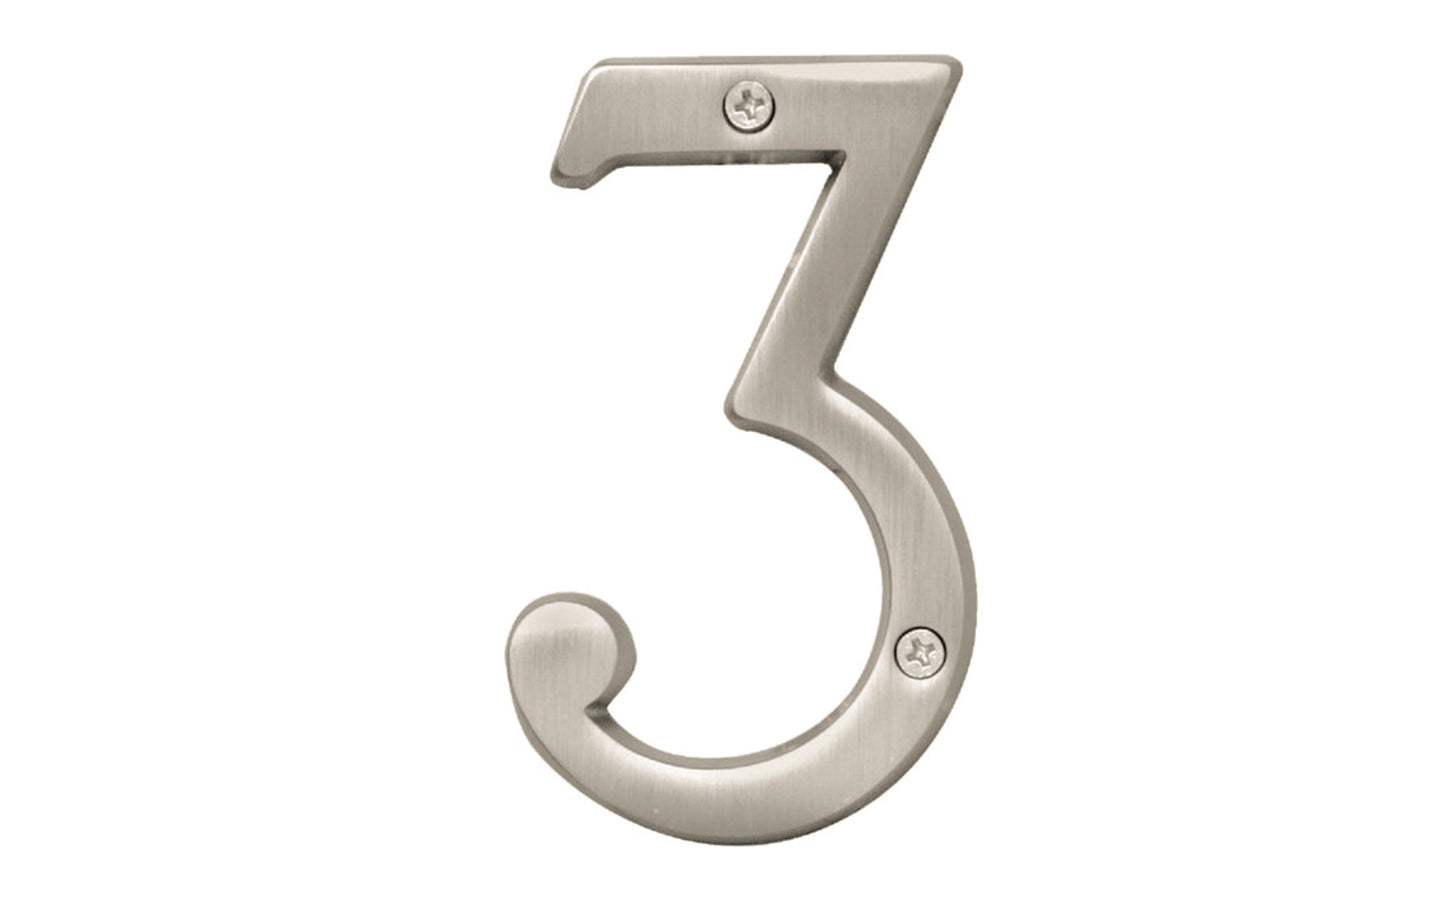 Number Three House Number in a 4" size. Satin nickel finish. Includes two phillips flat head screws. #3 house number. Hy-Ko Model BR-43SN/3.  Hardware house numbers for outdoors. Includes screws. 029069309336. #3 Satin Nickel House Number - 4" Size